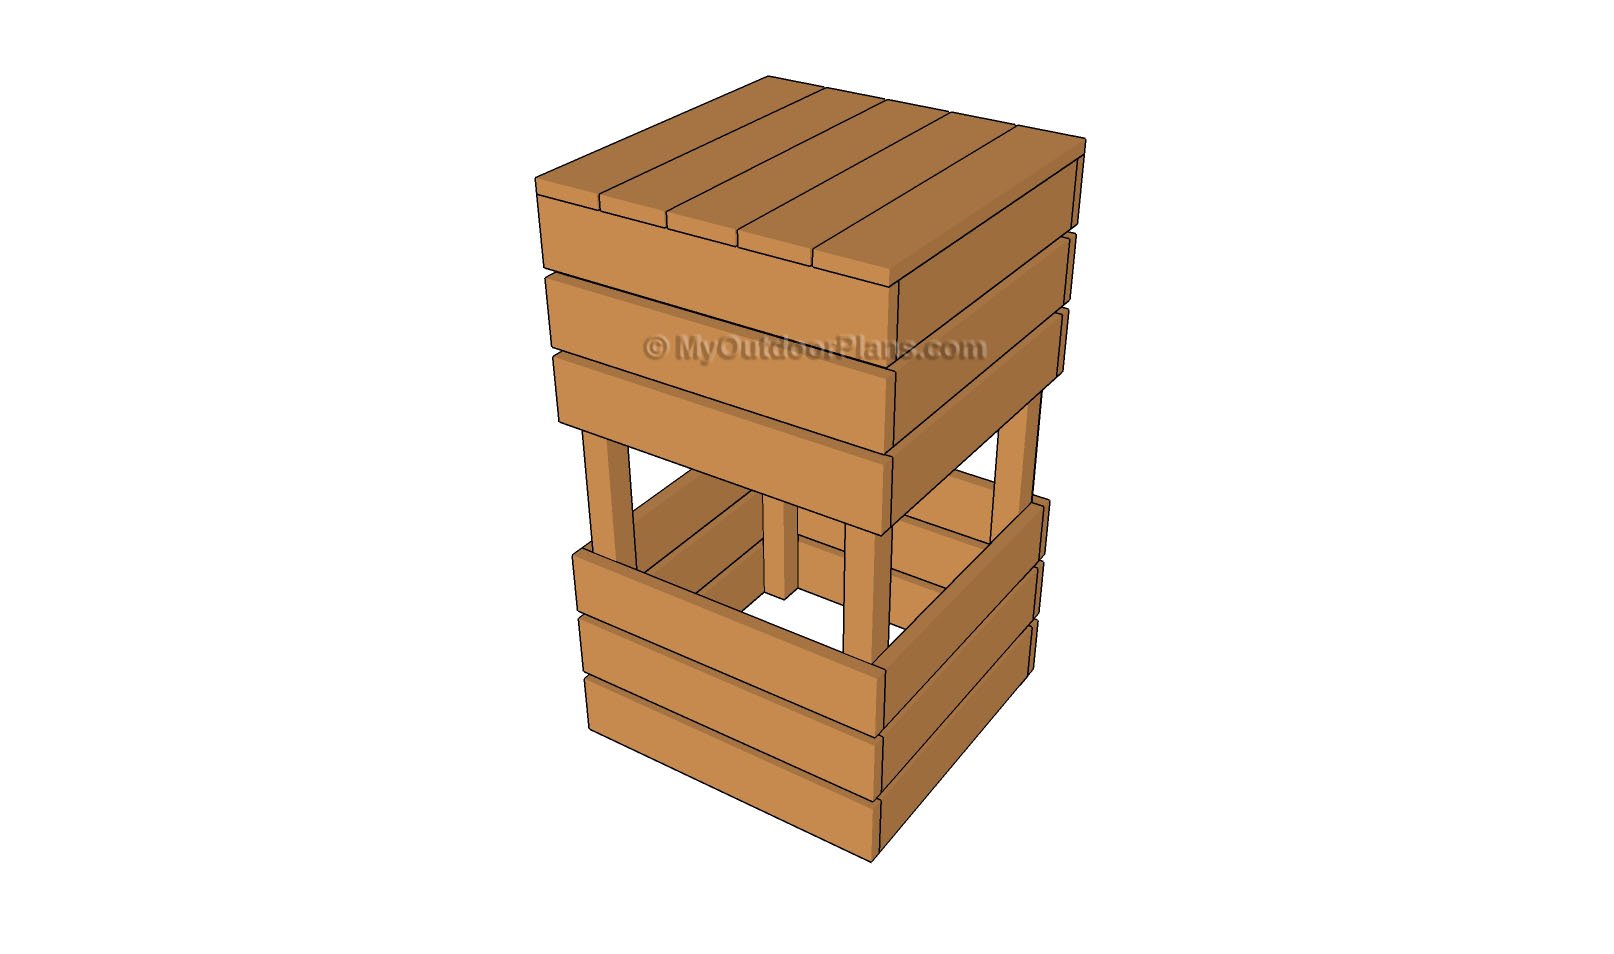 Pallet Bar Stool Plans  Free Outdoor Plans - DIY Shed, Wooden 